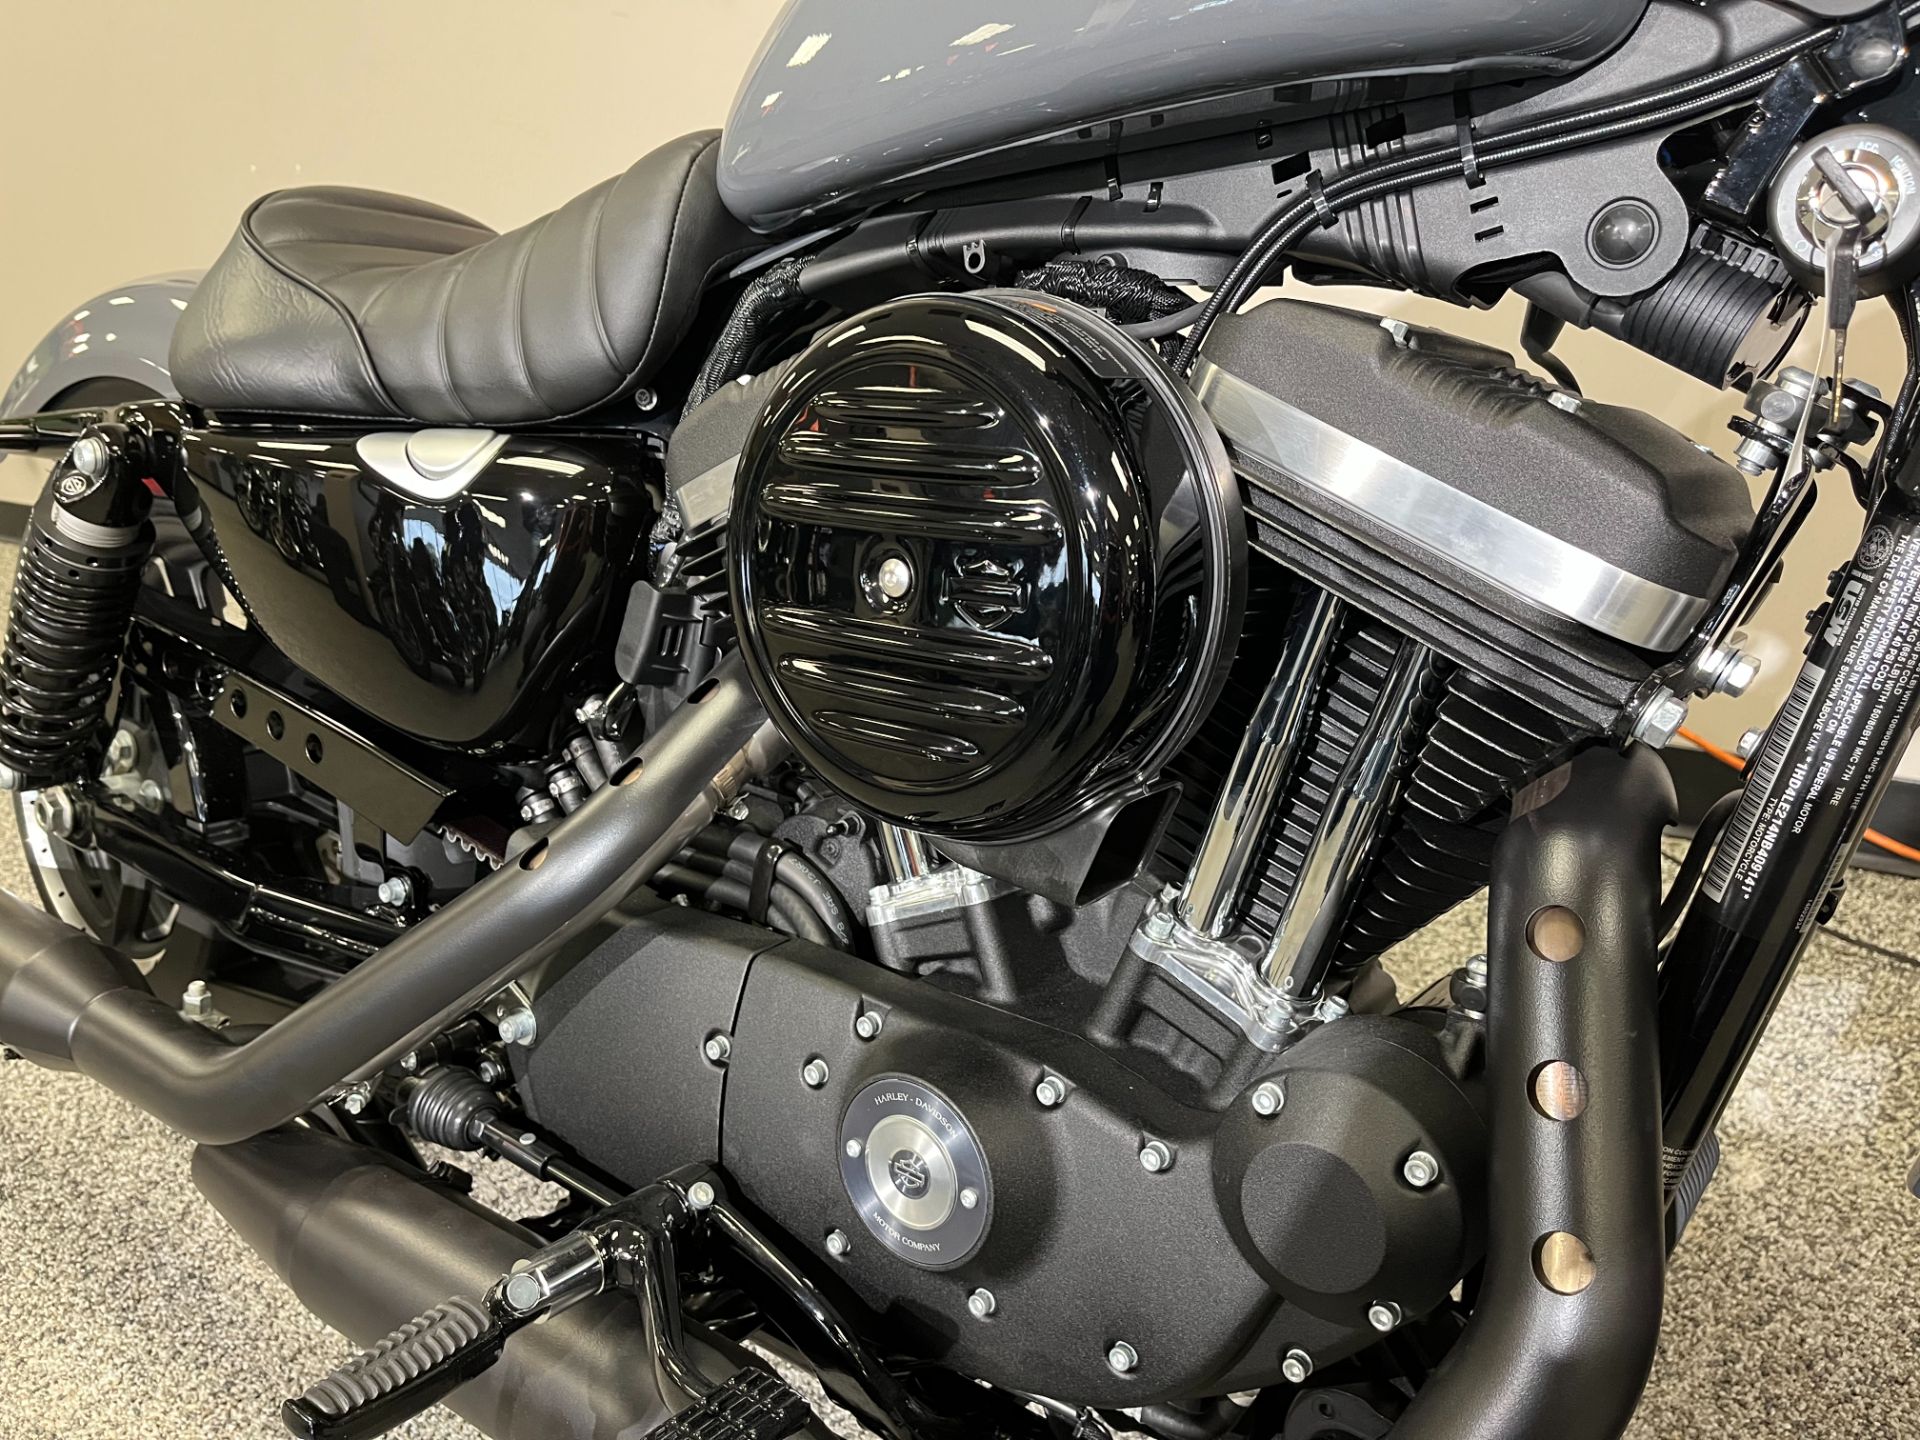 2022 Harley-Davidson IRON 883 in Knoxville, Tennessee - Photo 4